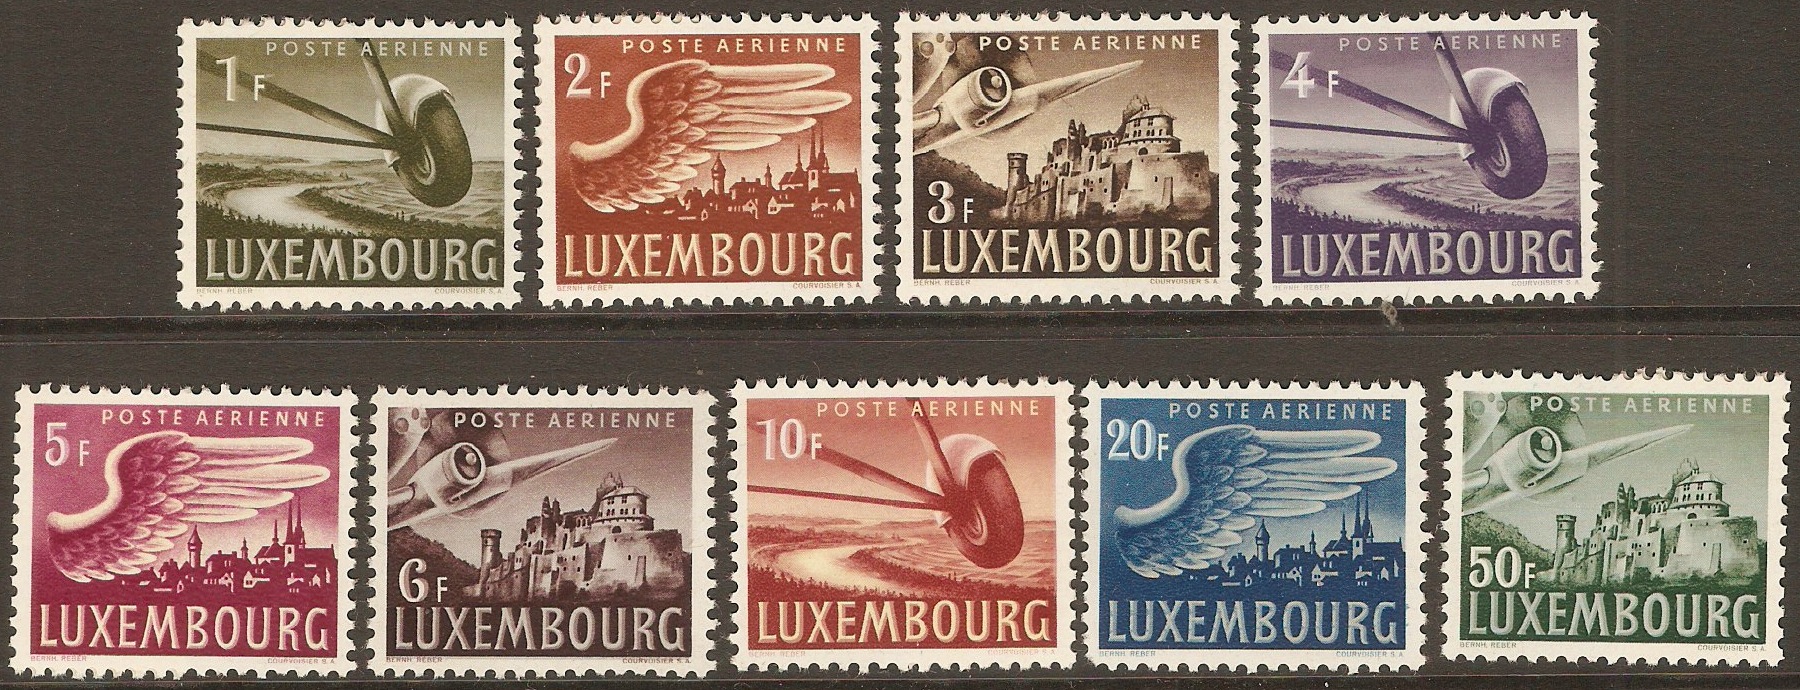 Luxembourg 1946 Air Stamps set. SG479-SG487.